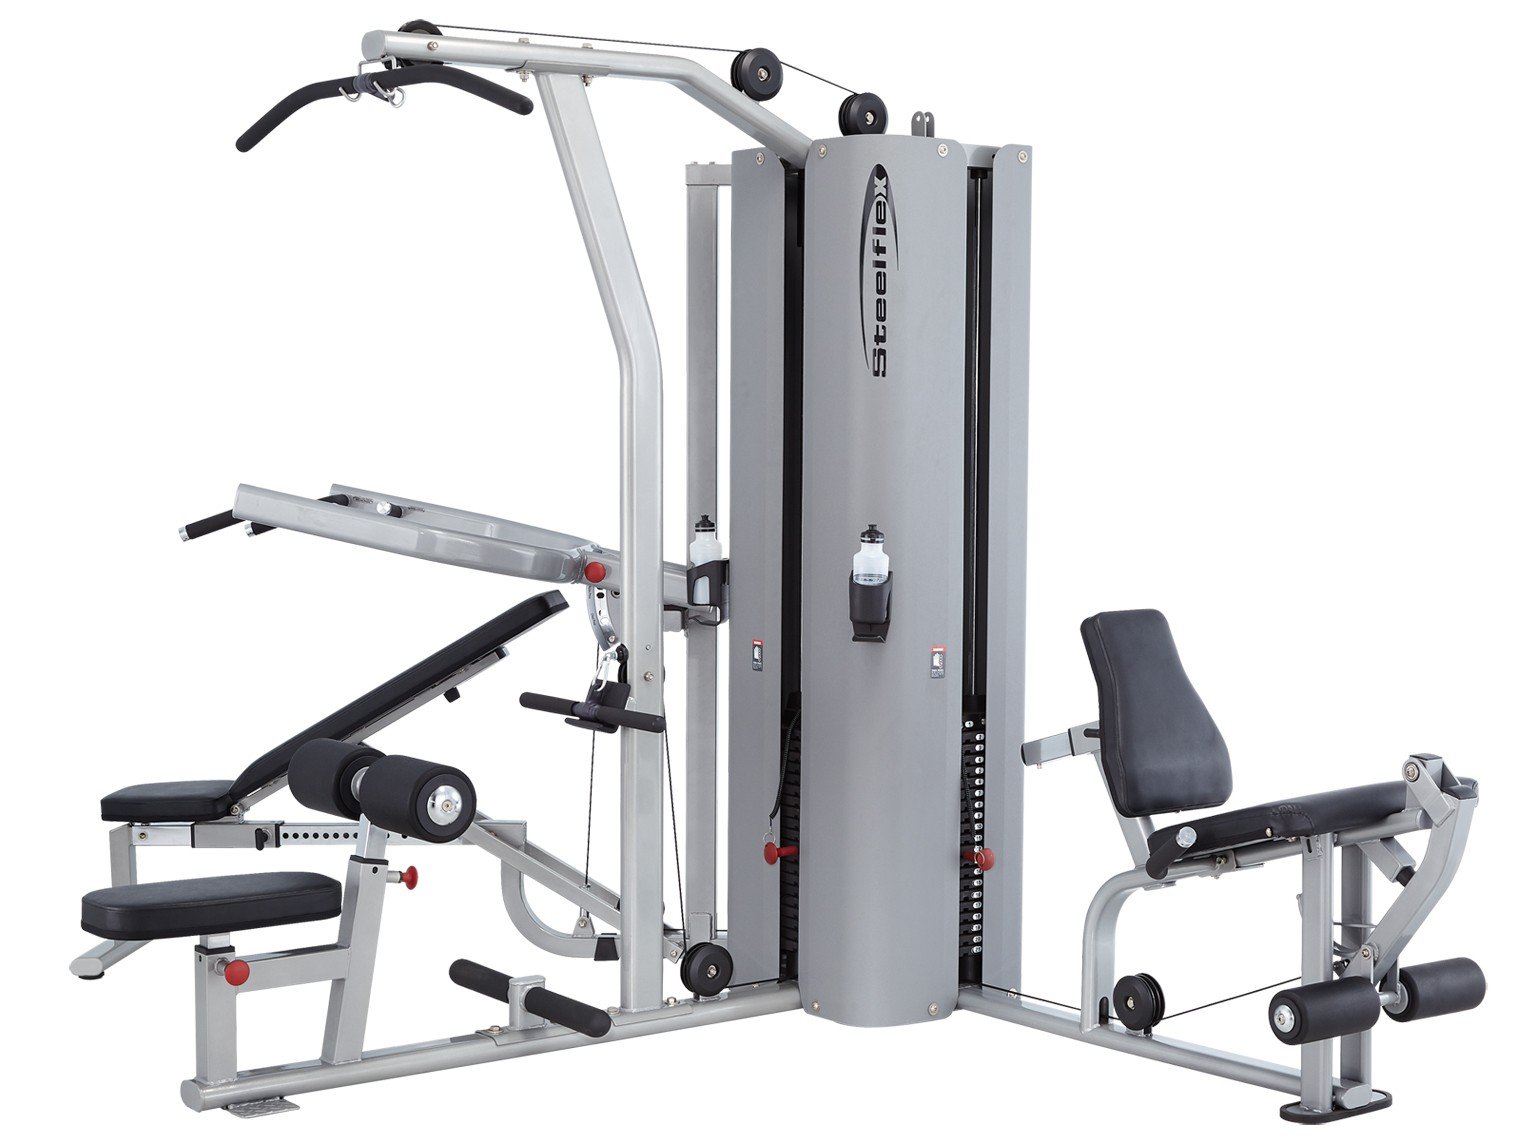 SteelFlex MG300 Commercial Multi Station Gym Machine 630 lb. Pulley Weight Stack - image 2 of 4